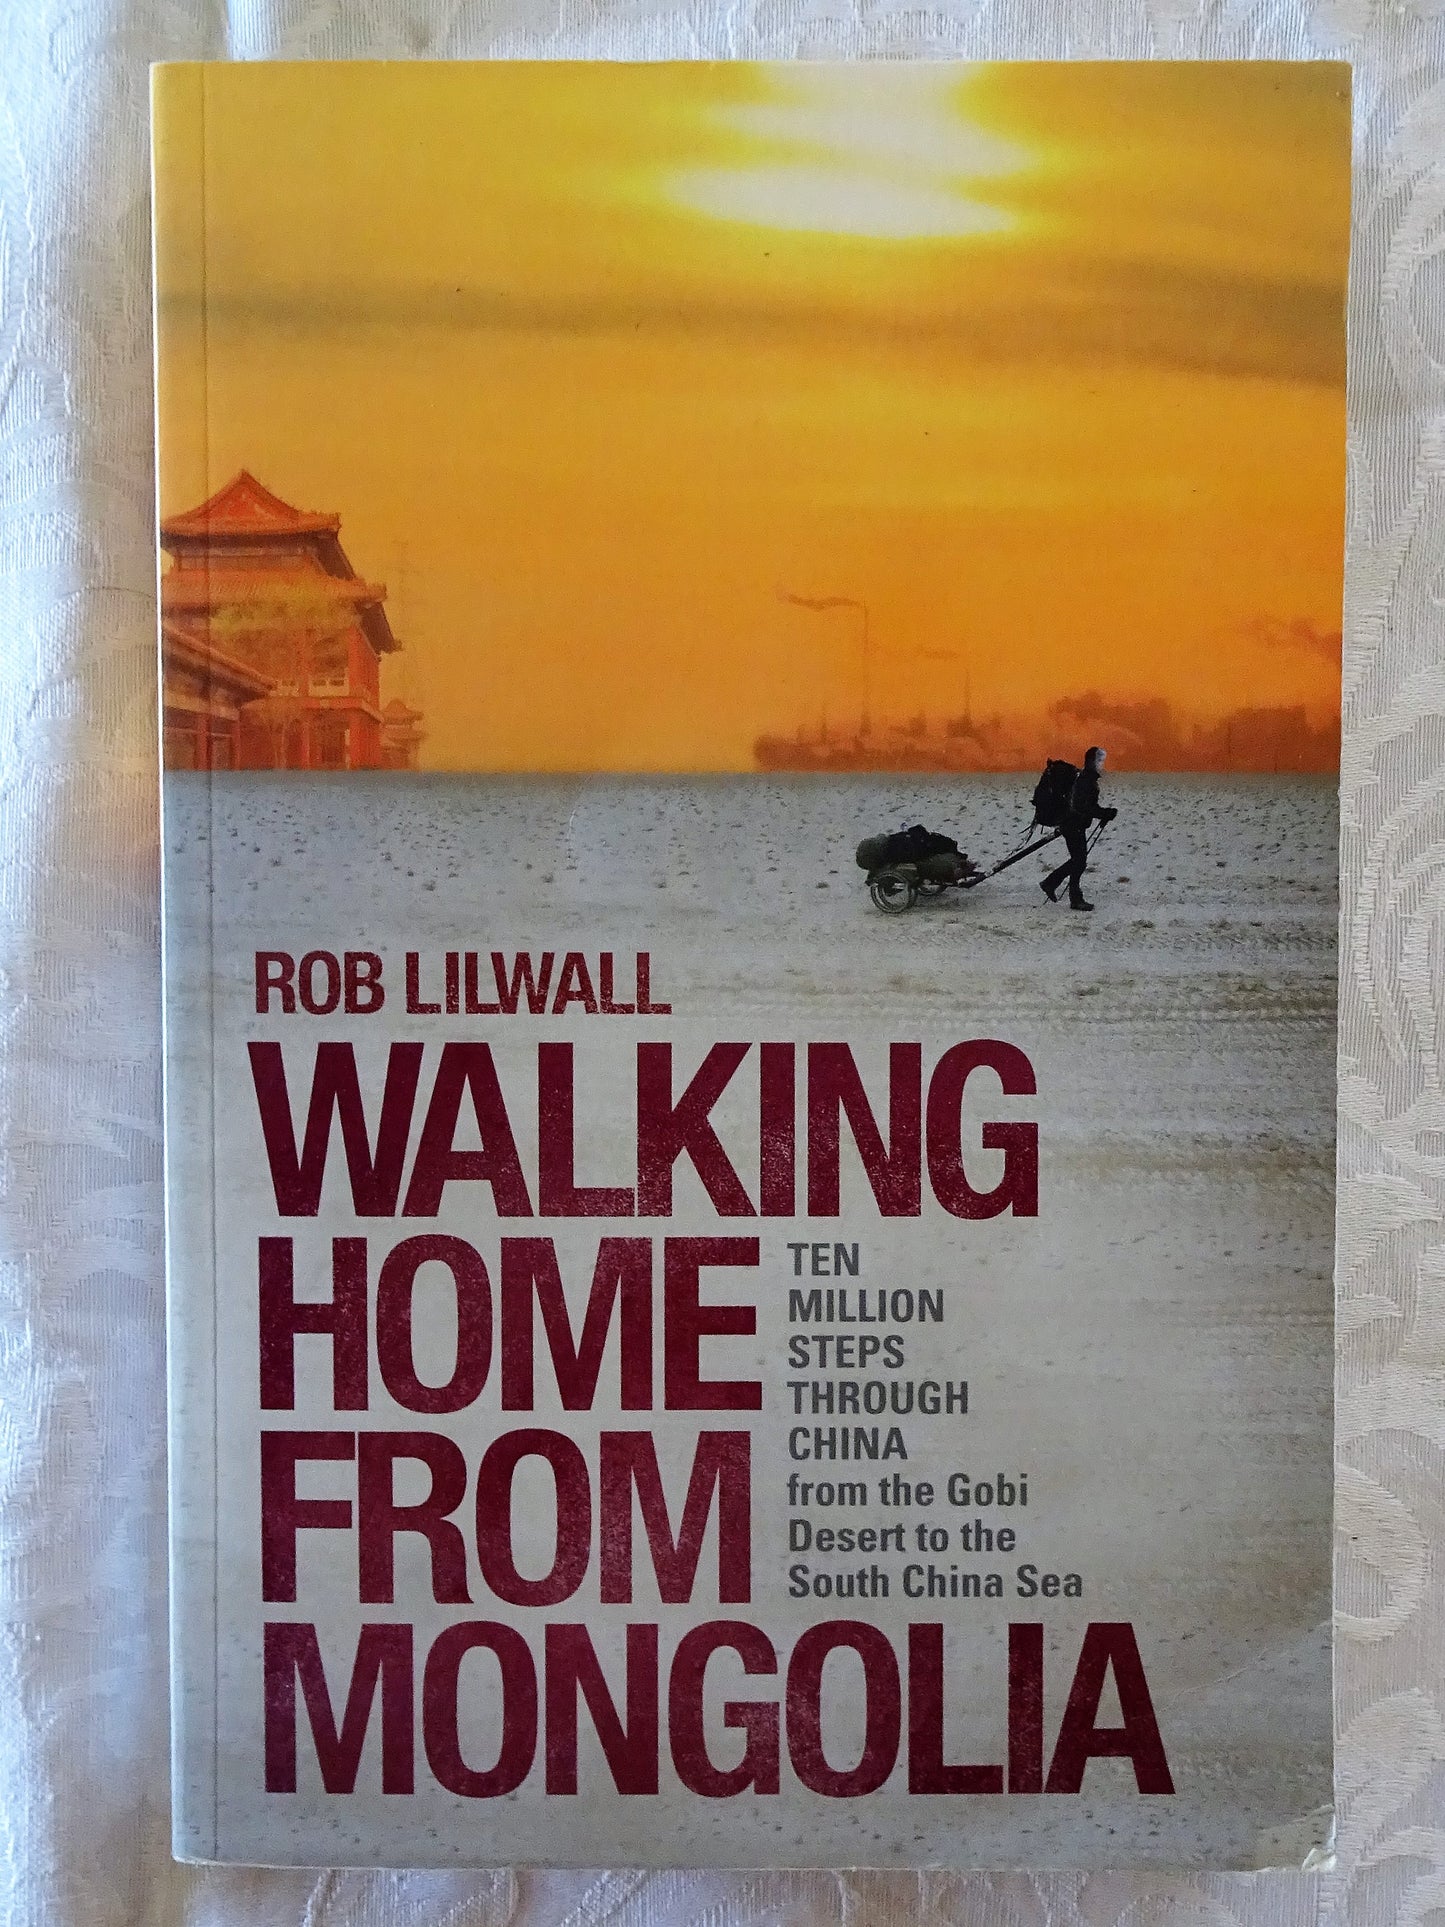 Walking Home From Mongolia by Rob Lilwall